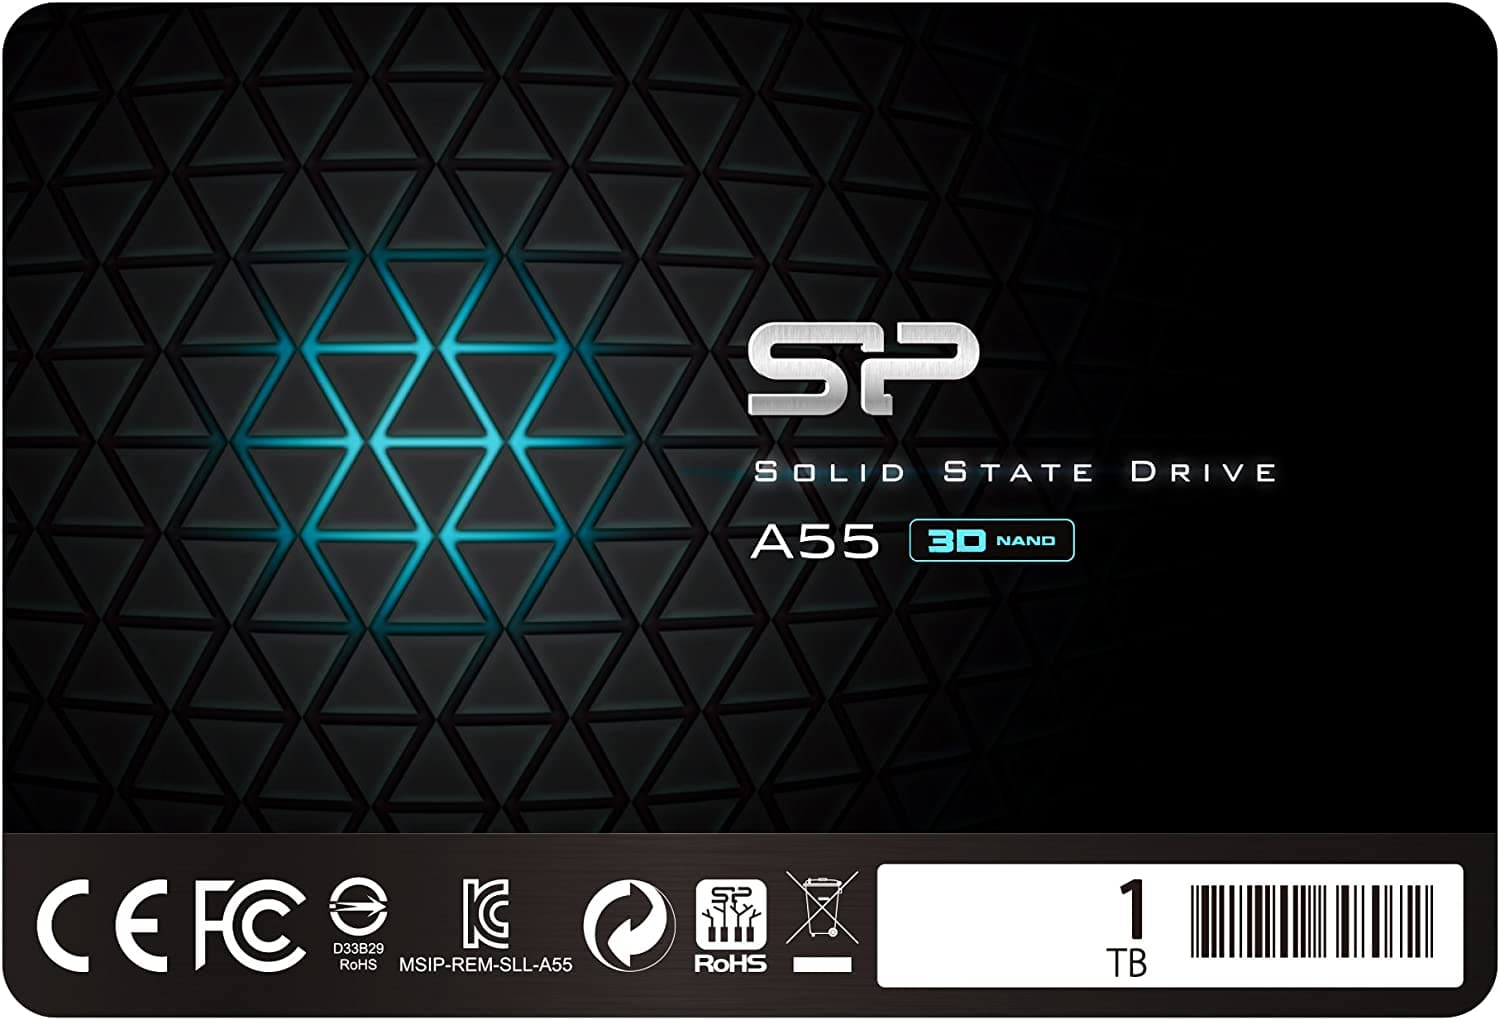 SSD 1TB SATA III 2.5 Internal Solid State Drives, Up to 550MB/s Read for  PC and Notebooks Bliksem KD650 (Black 1TB)